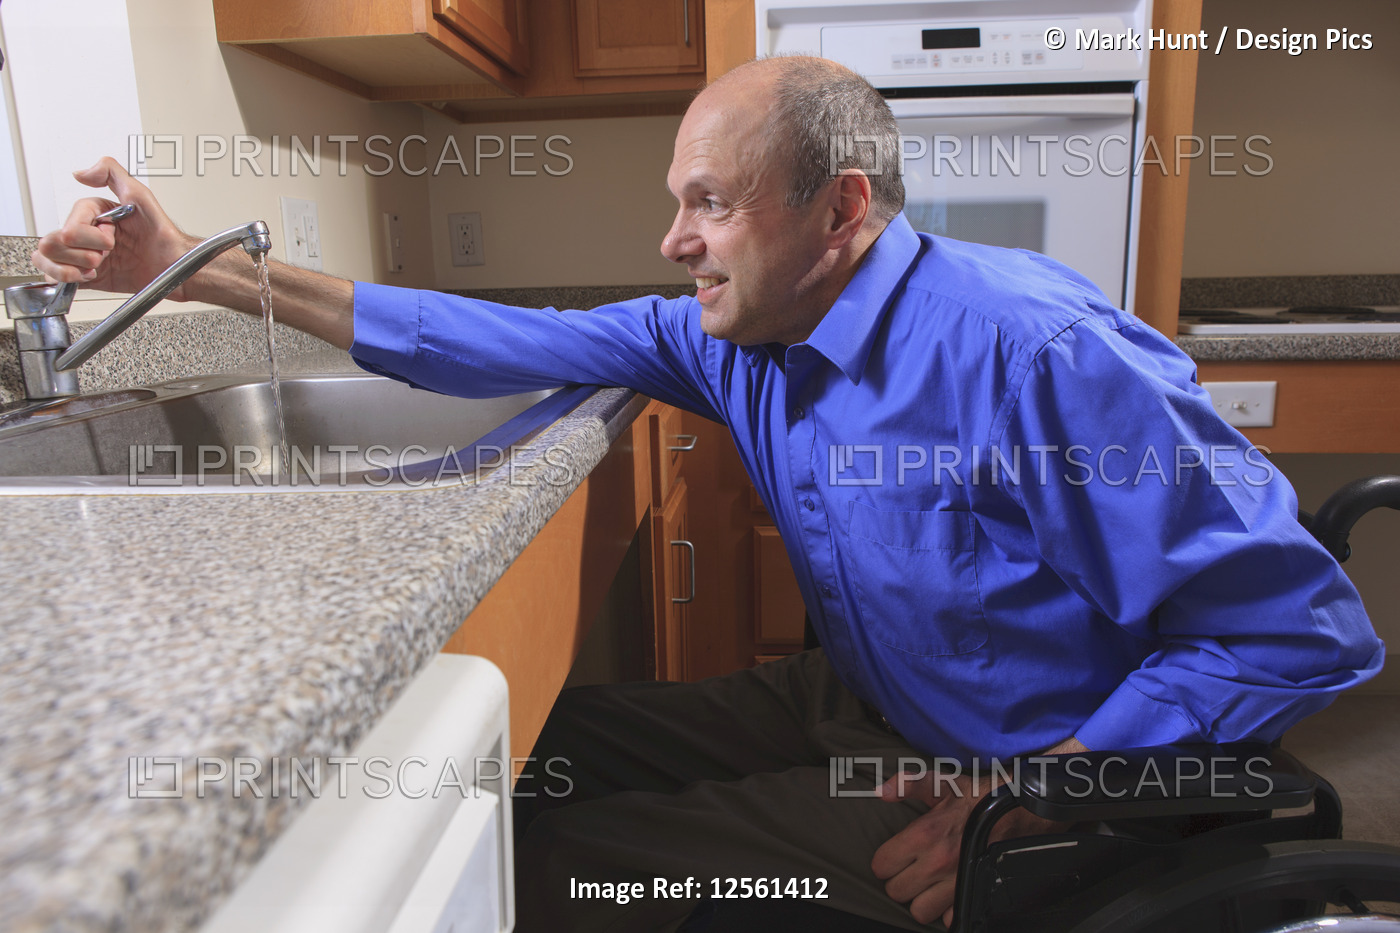 Man with Friedreich's Ataxia and deformed hands using his faucet in the kitchen